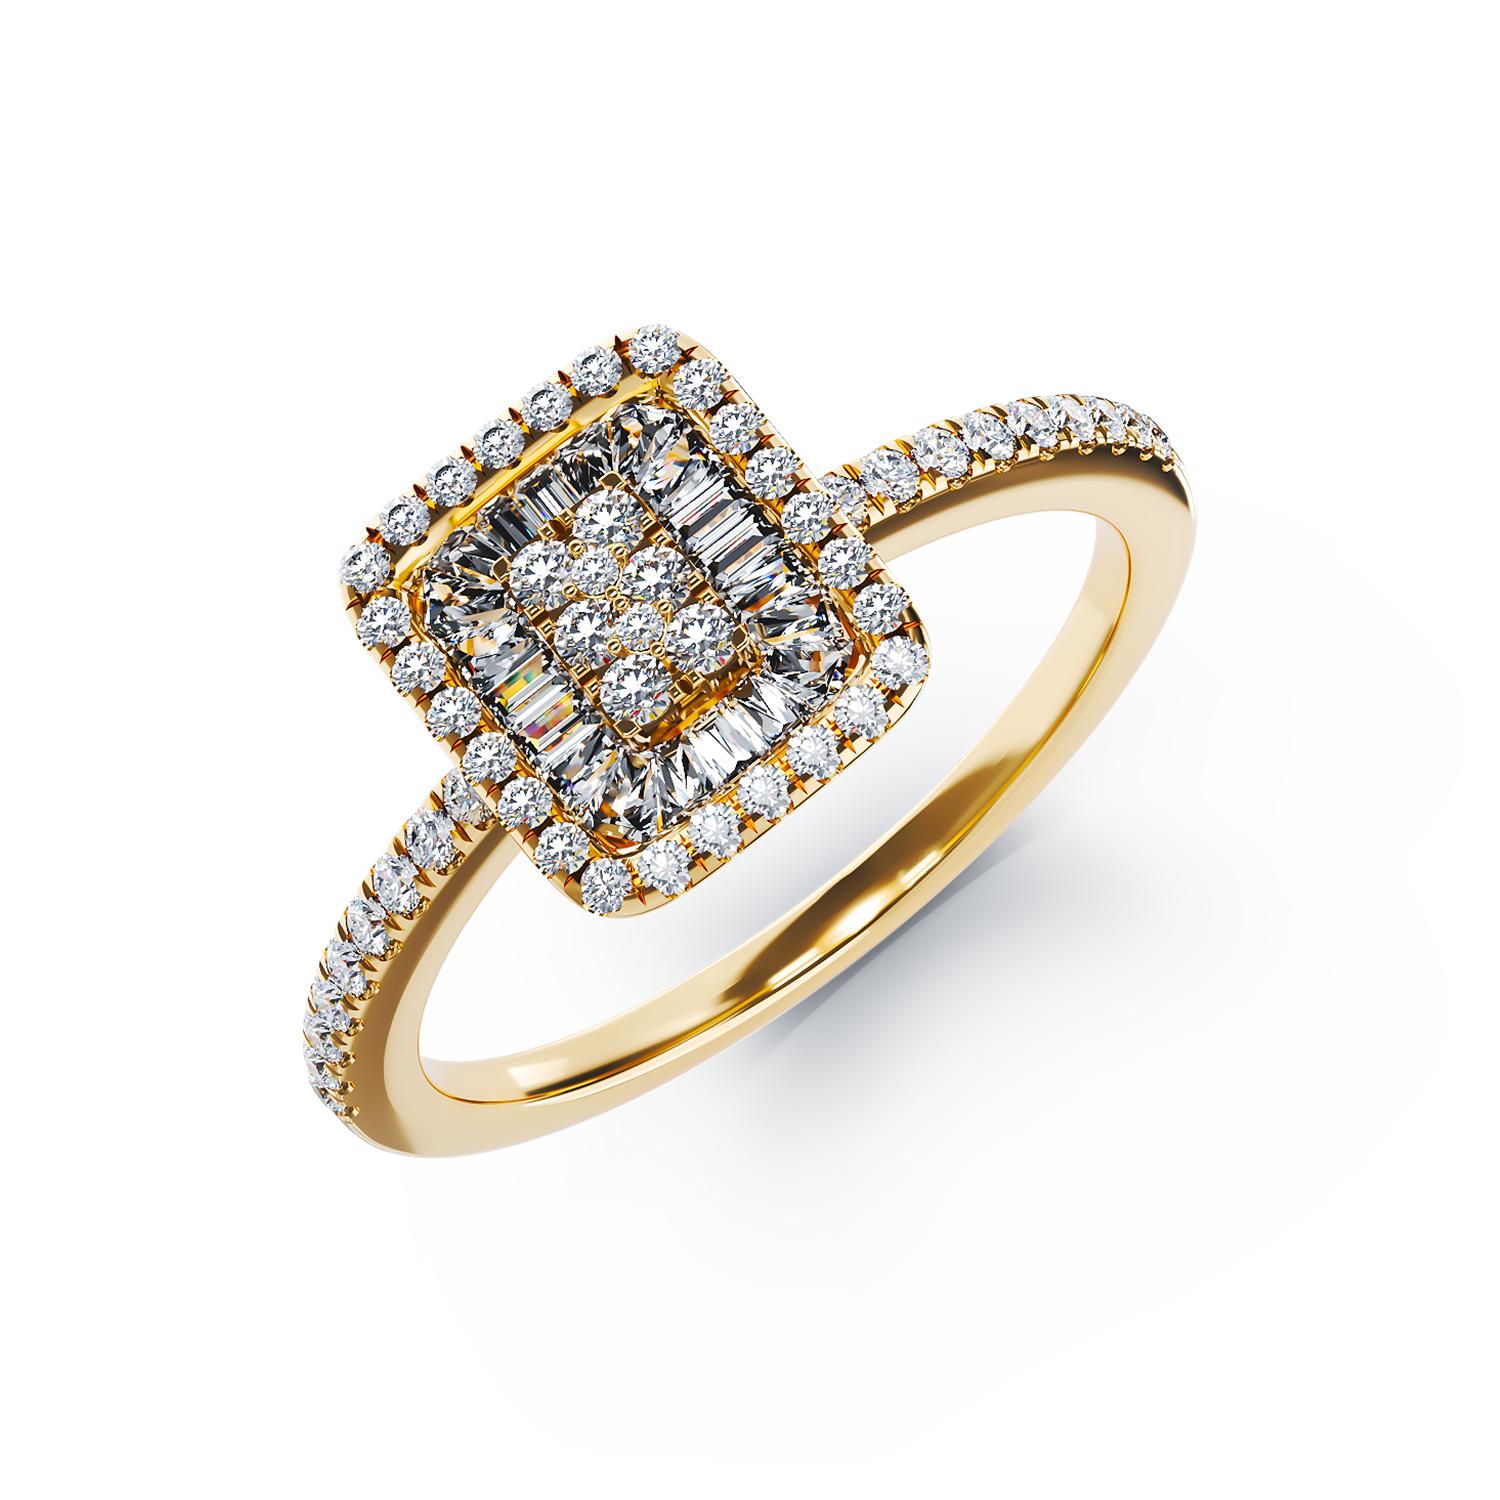 18K yellow gold engagement ring with 0.29ct diamonds